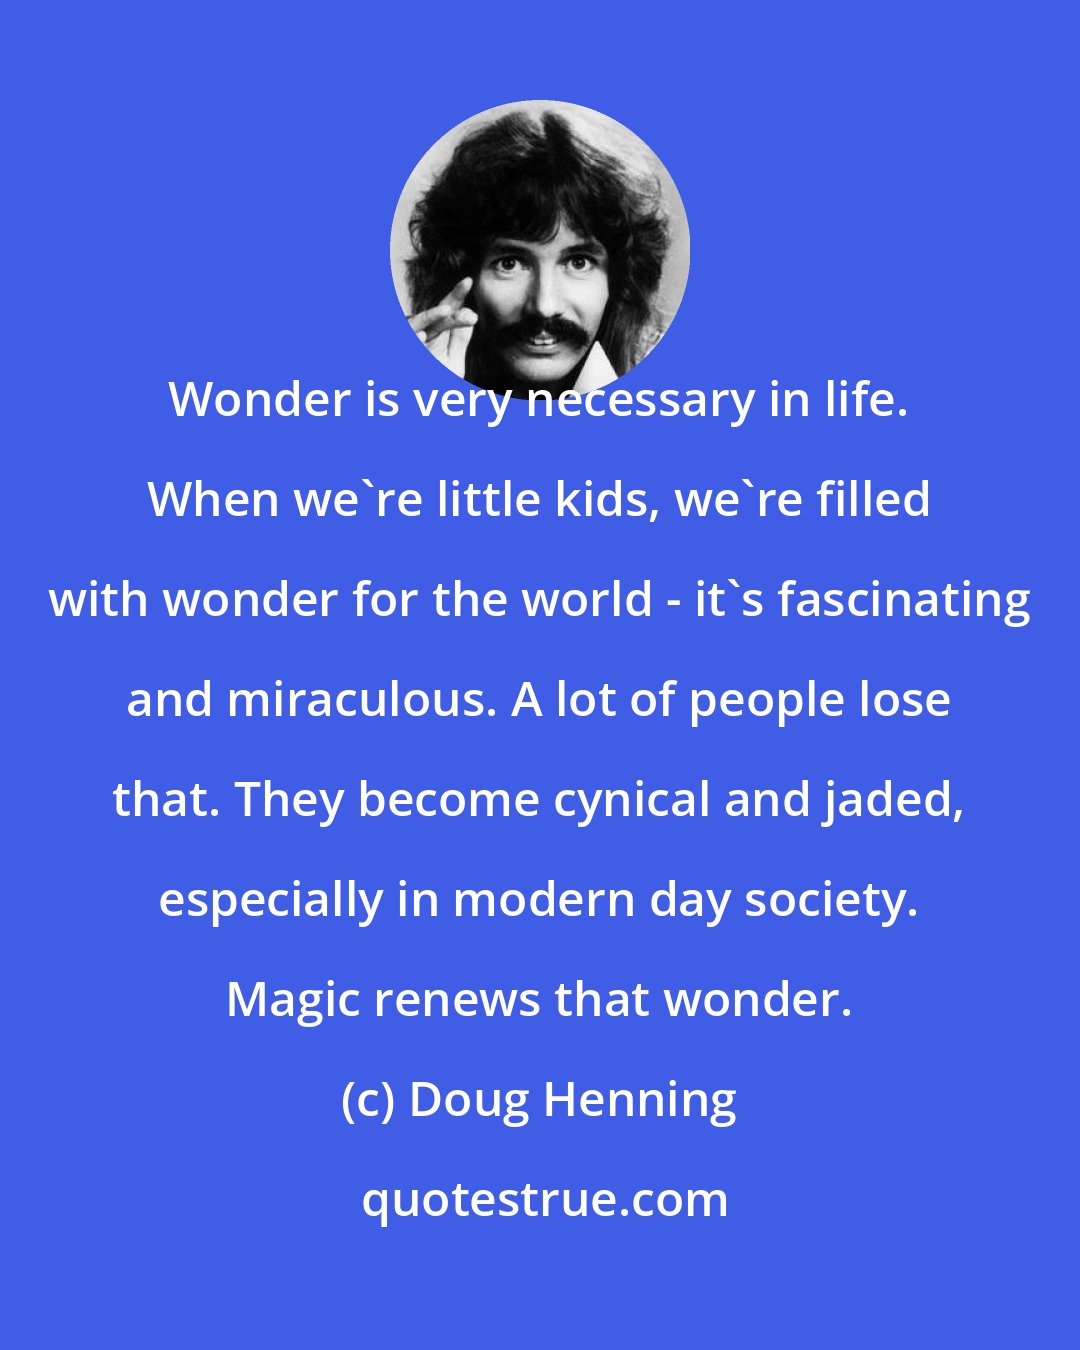 Doug Henning: Wonder is very necessary in life. When we're little kids, we're filled with wonder for the world - it's fascinating and miraculous. A lot of people lose that. They become cynical and jaded, especially in modern day society. Magic renews that wonder.